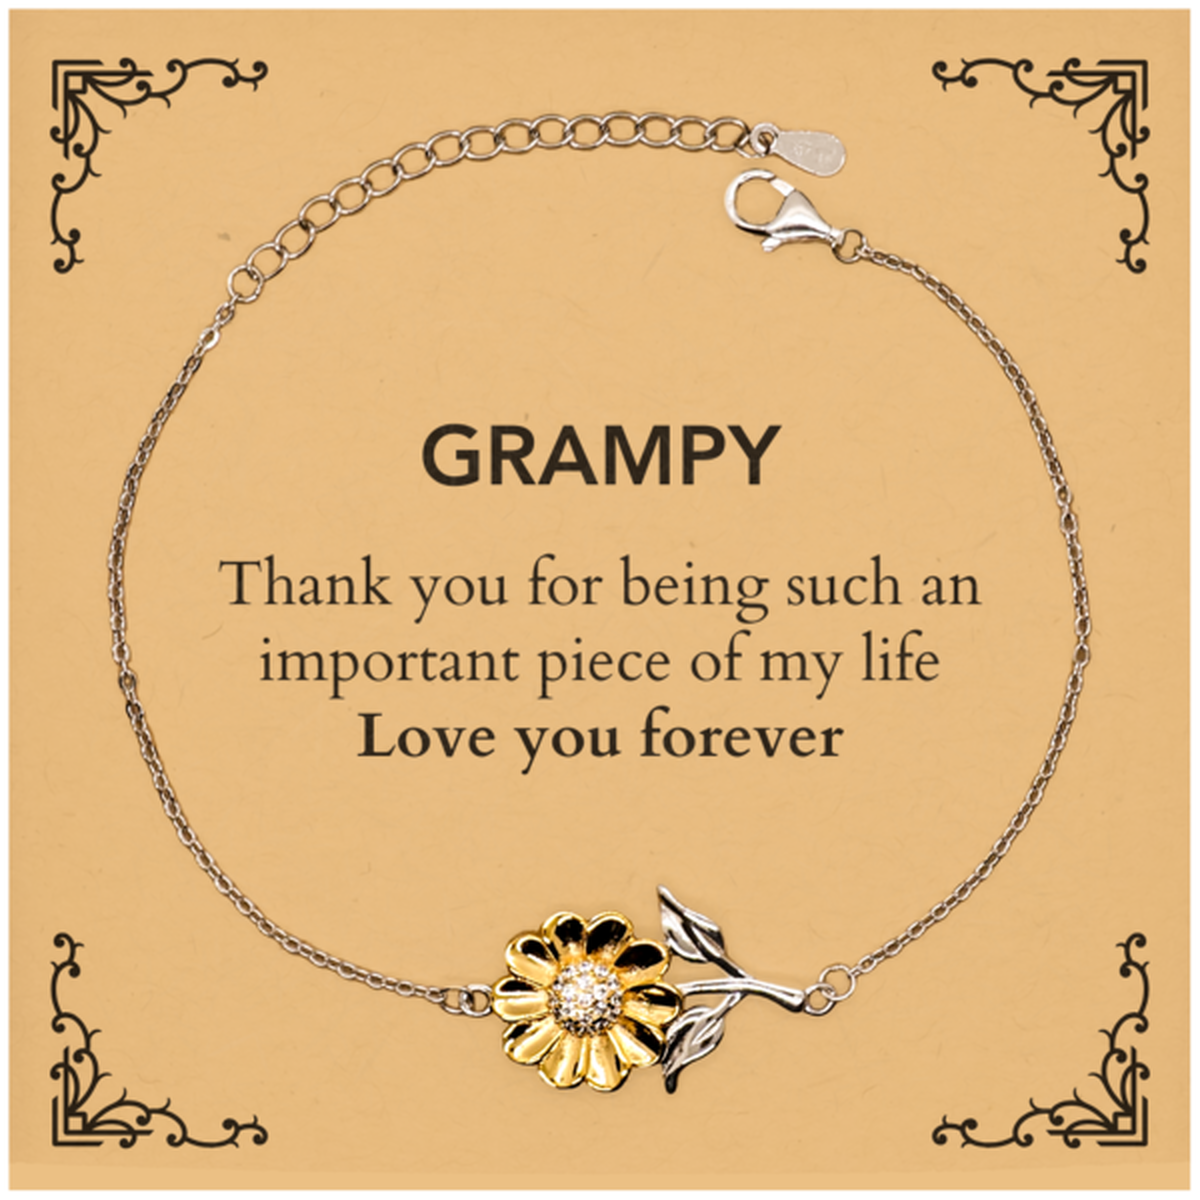 Appropriate Grampy Sunflower Bracelet Epic Birthday Gifts for Grampy Thank you for being such an important piece of my life Grampy Christmas Mothers Fathers Day